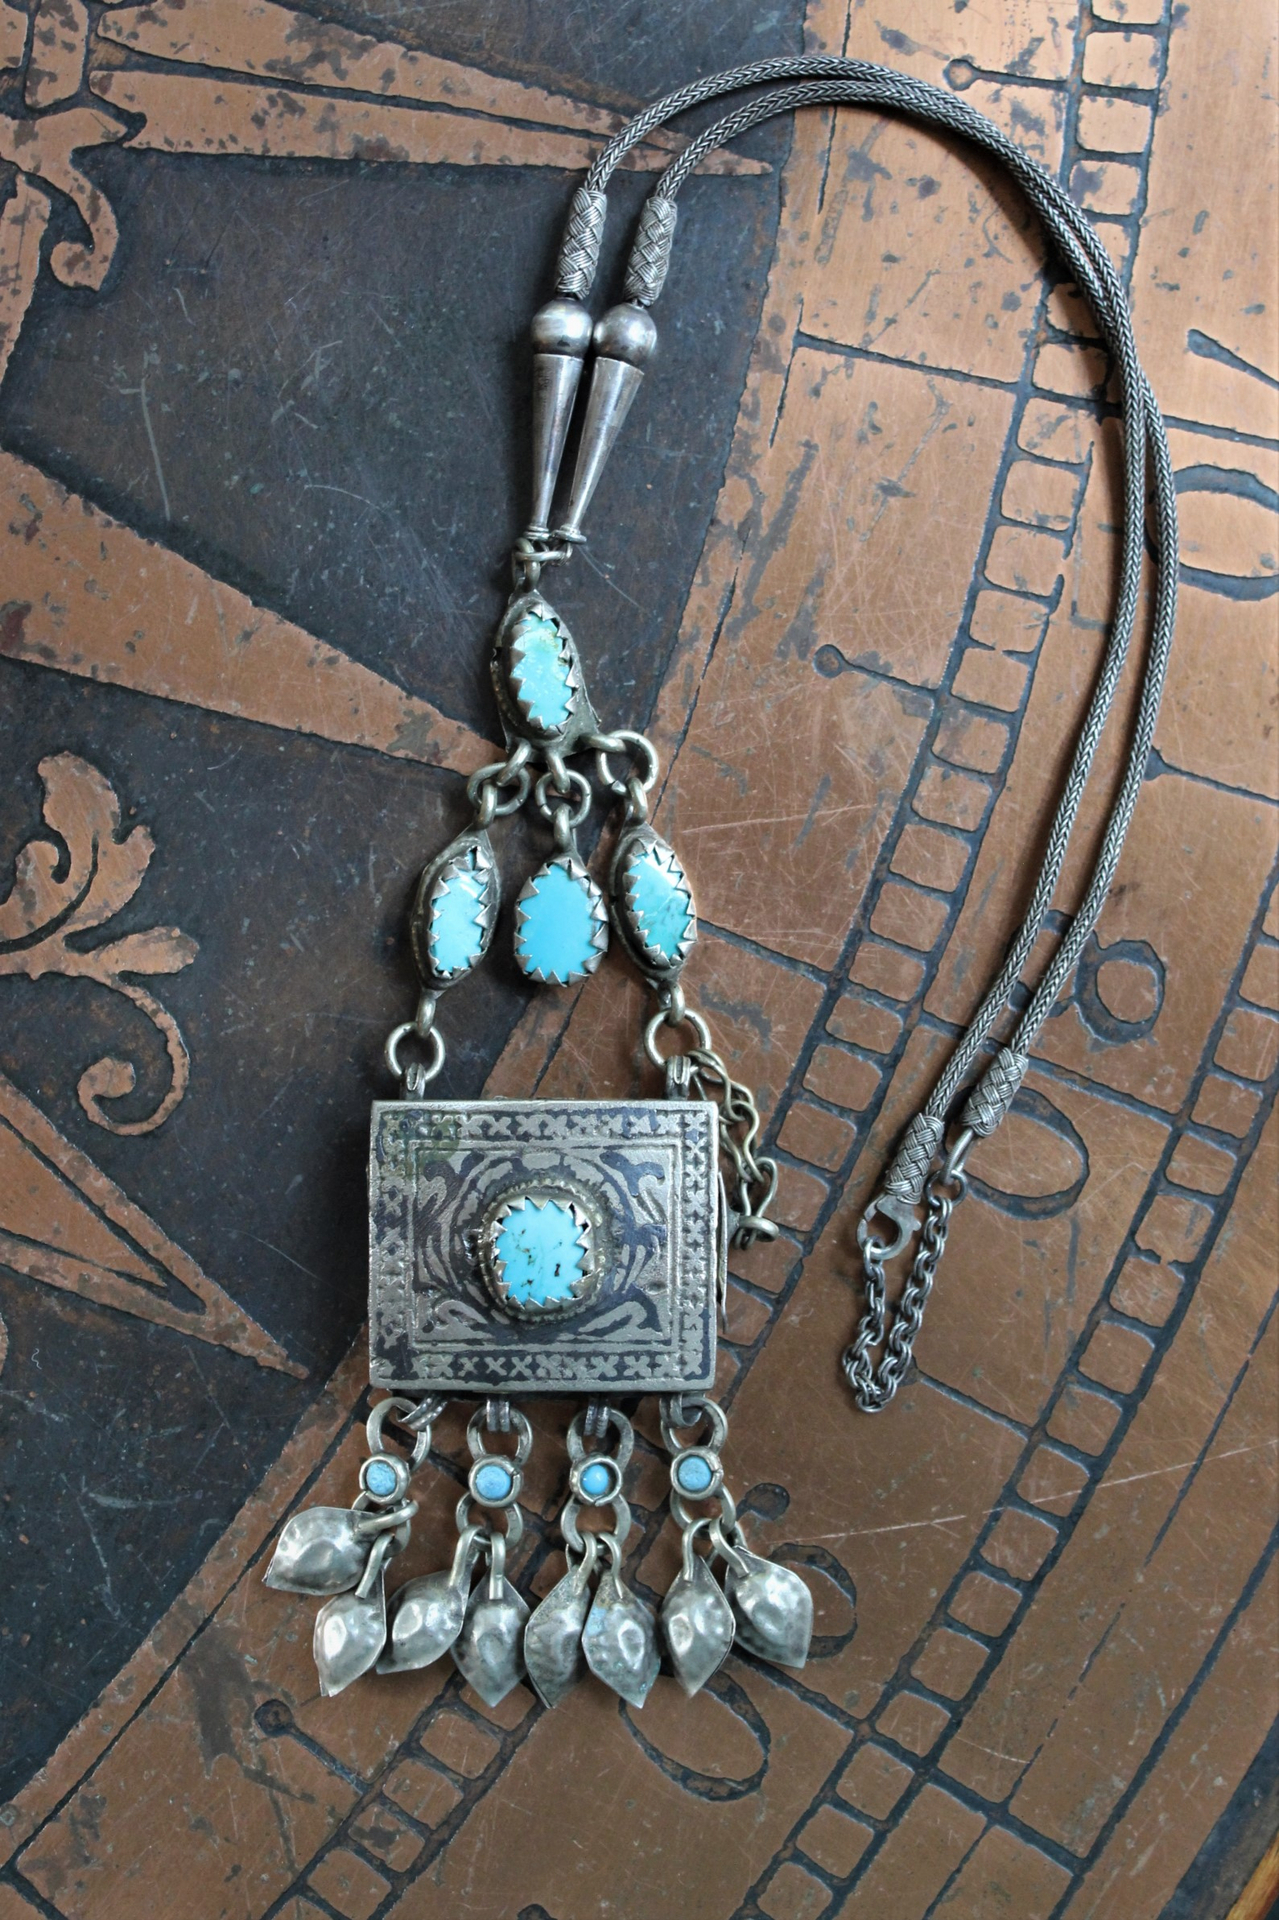 Let the Heart Sing Necklace with Unique Kuchi Gypsy Prayer Box Pendant, Turquoise Cabochons, Antique Sterling Foxtail Chain